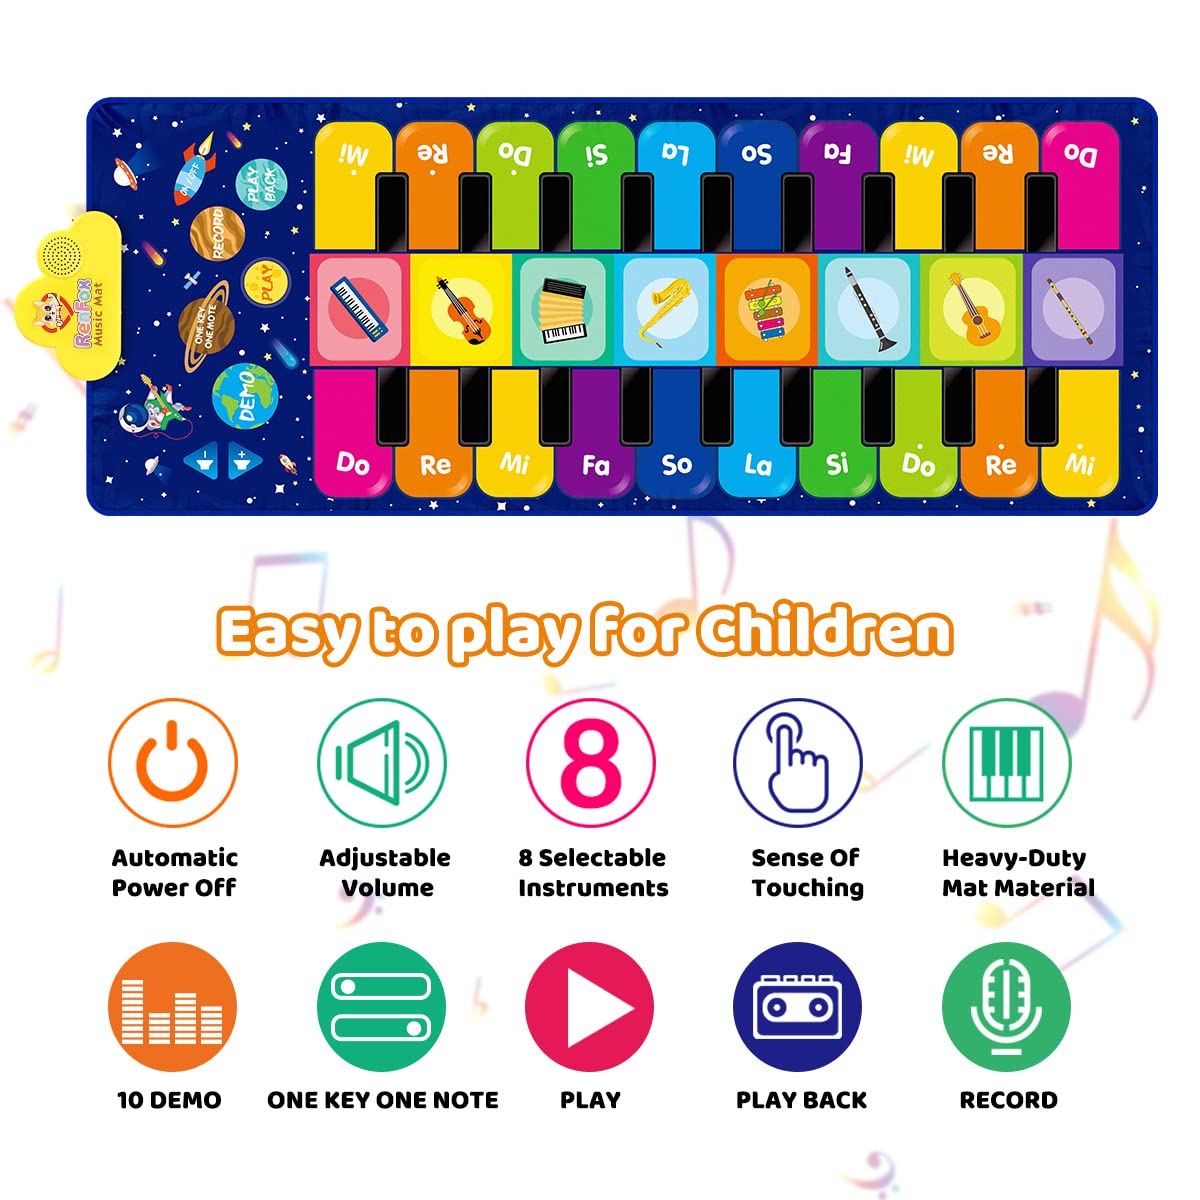 Renfox Kids Musical Piano Mat - Duet Keyboard Play Mat 20 Keys Floor Piano with 8 Instrument Sound, 5 Paly Modes Dance Pad, Early Educational Toys & Gift for 3+ Years Old Boys Girls